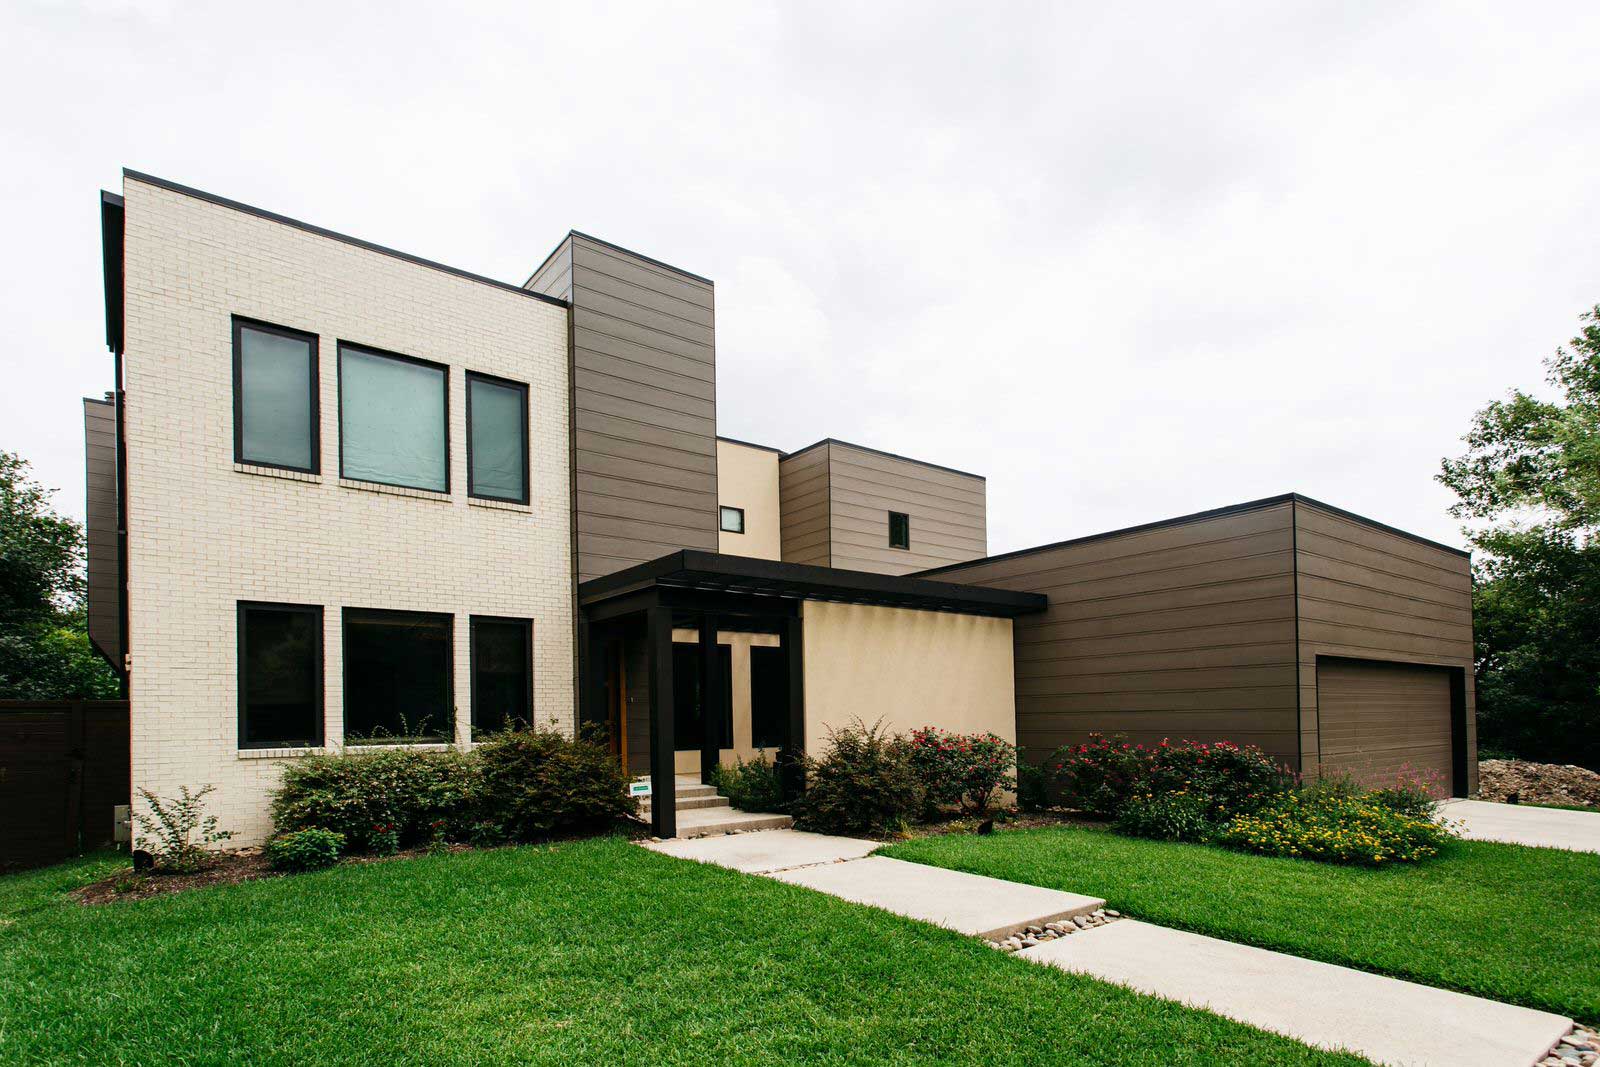 Modern Fort Worth, Texas home with brick and James Hardie fiber cement siding.